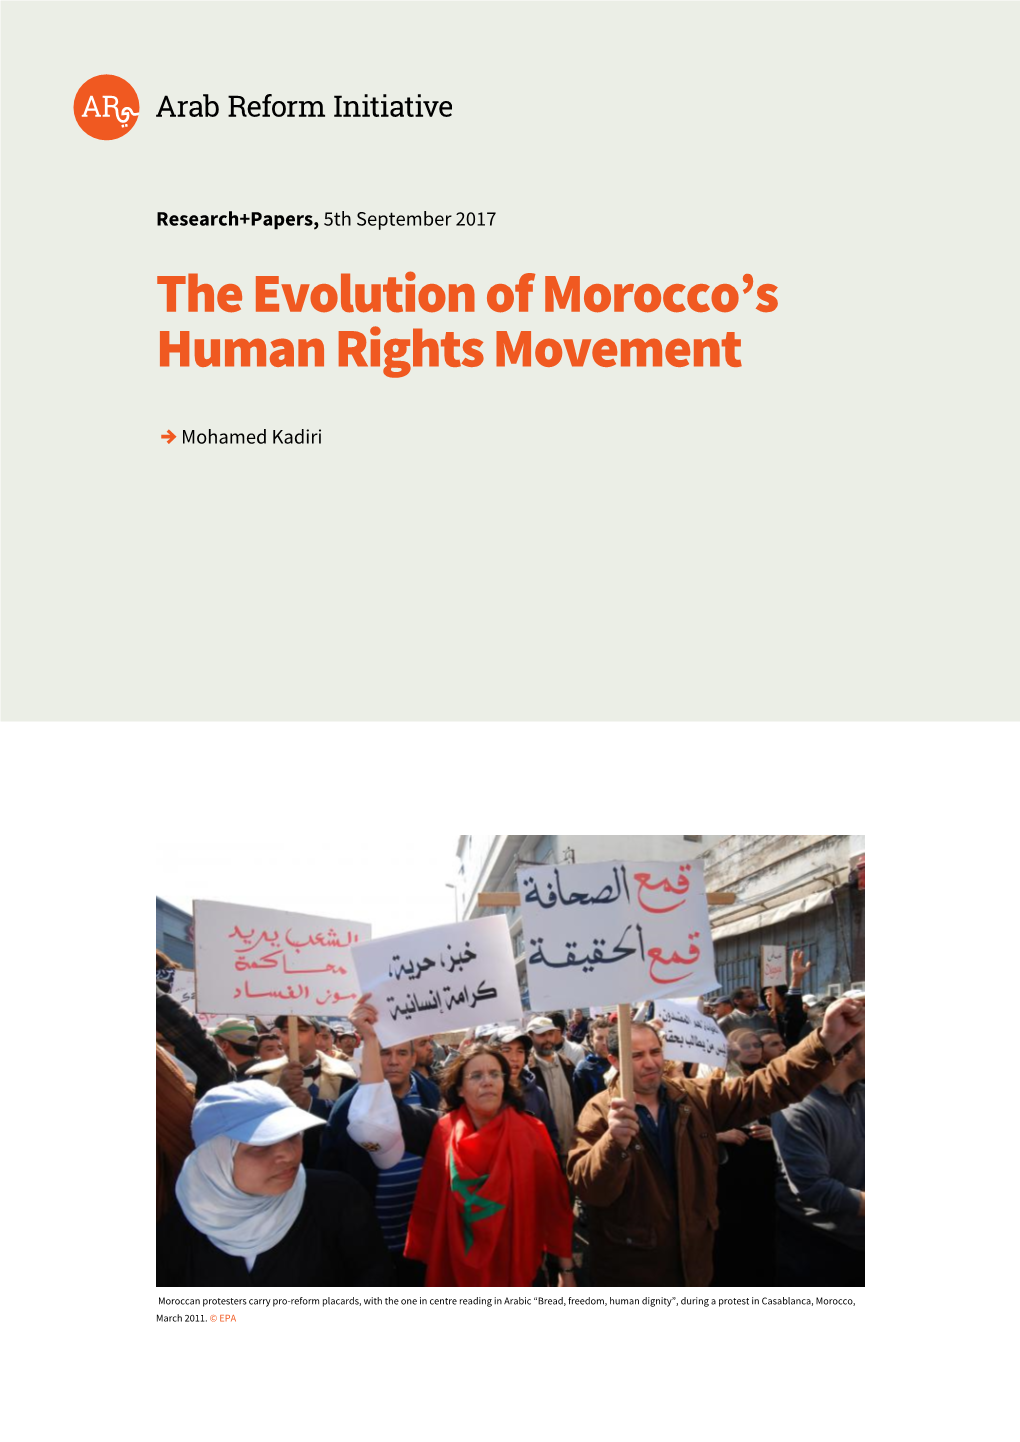 The Evolution of Morocco's Human Rights Movement